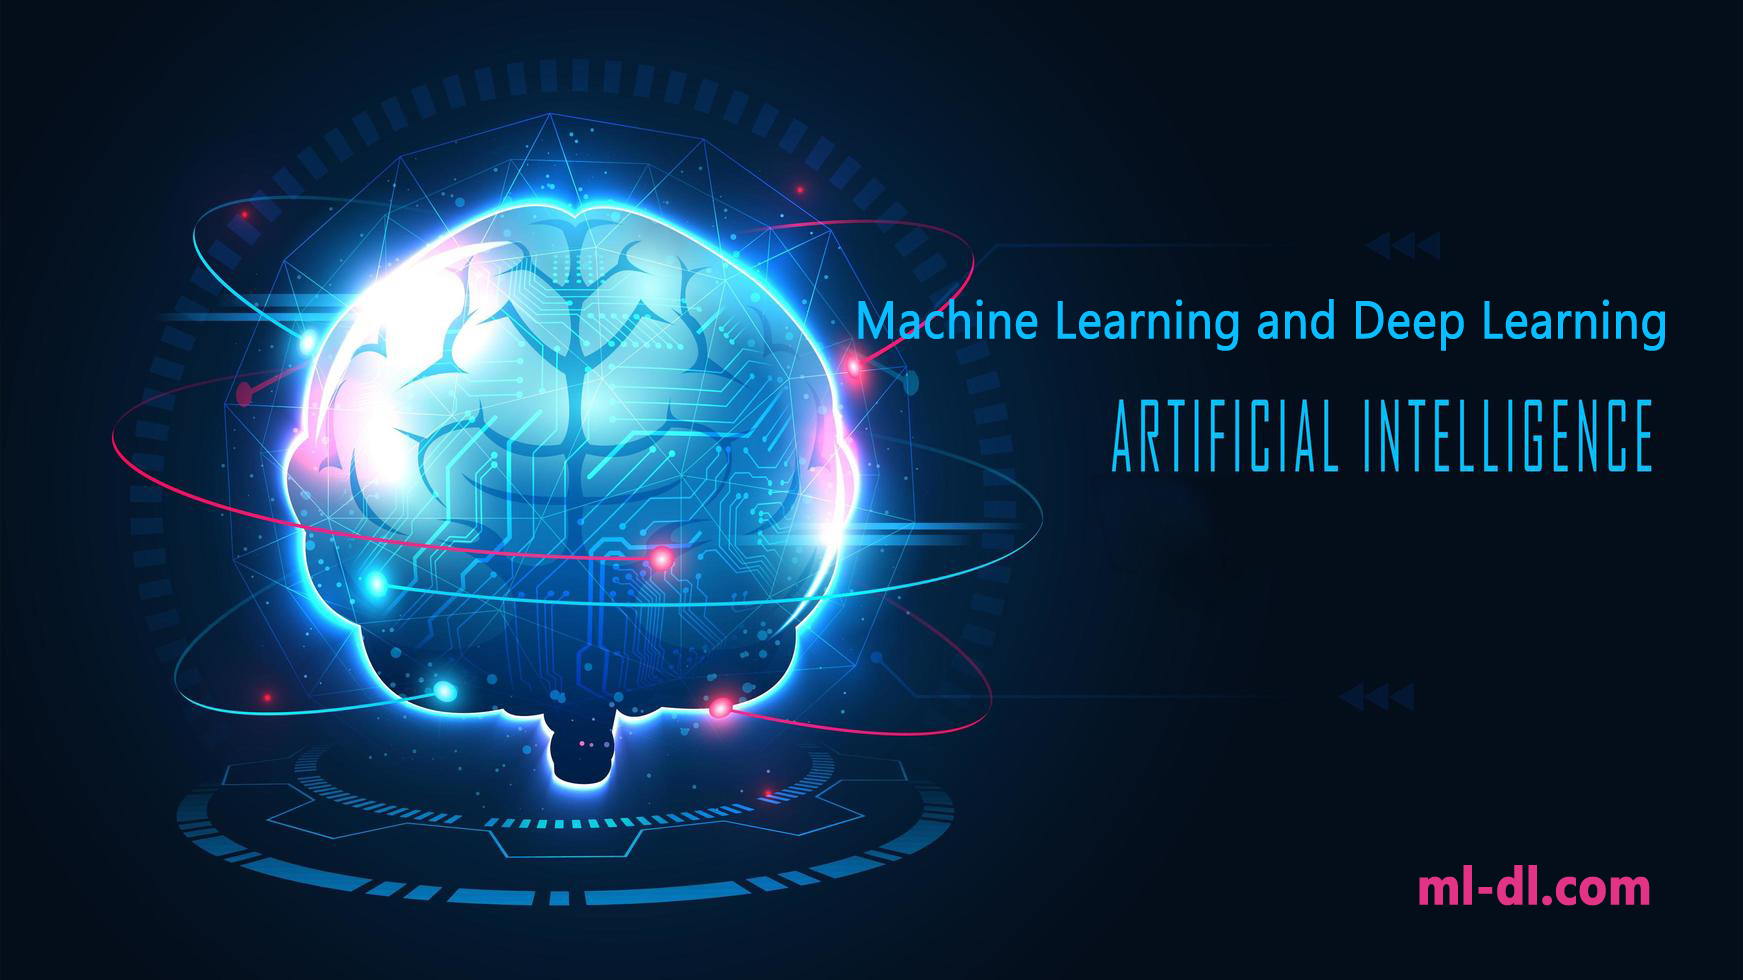 ml-dl-machine-learning-deep-learning-concepts.jpg